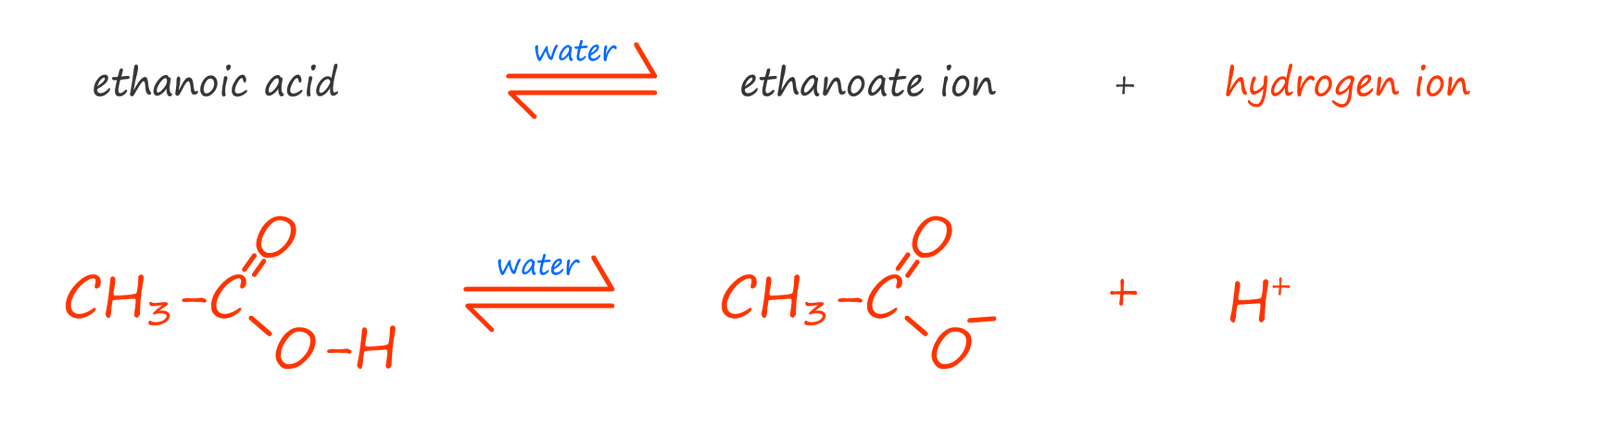 Dissociation of methanoic acid to form methanoate ions and hydrogen ions